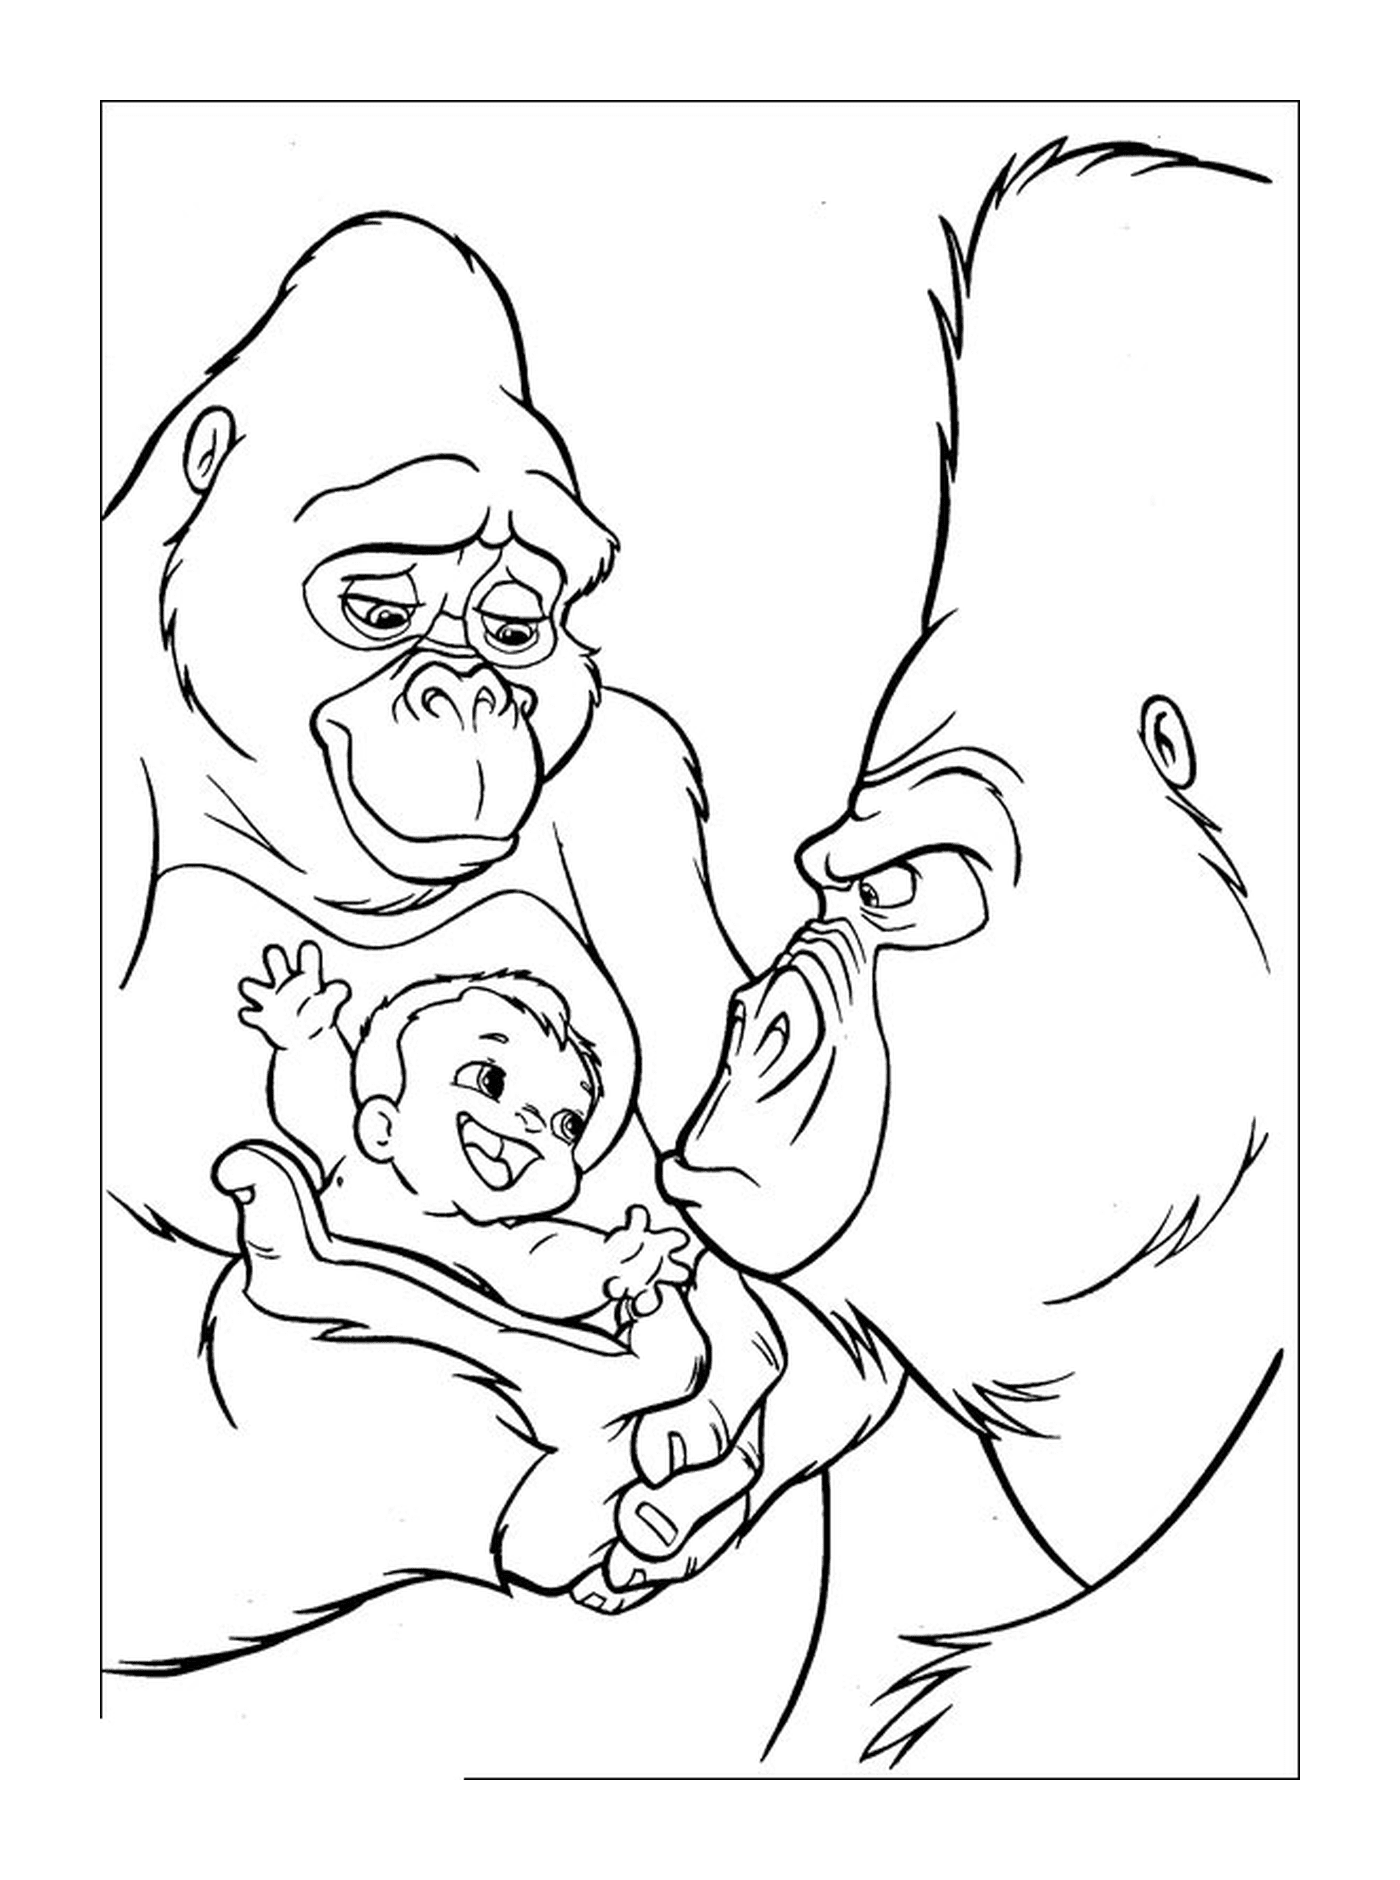  Adult and baby gorilla with a baby 